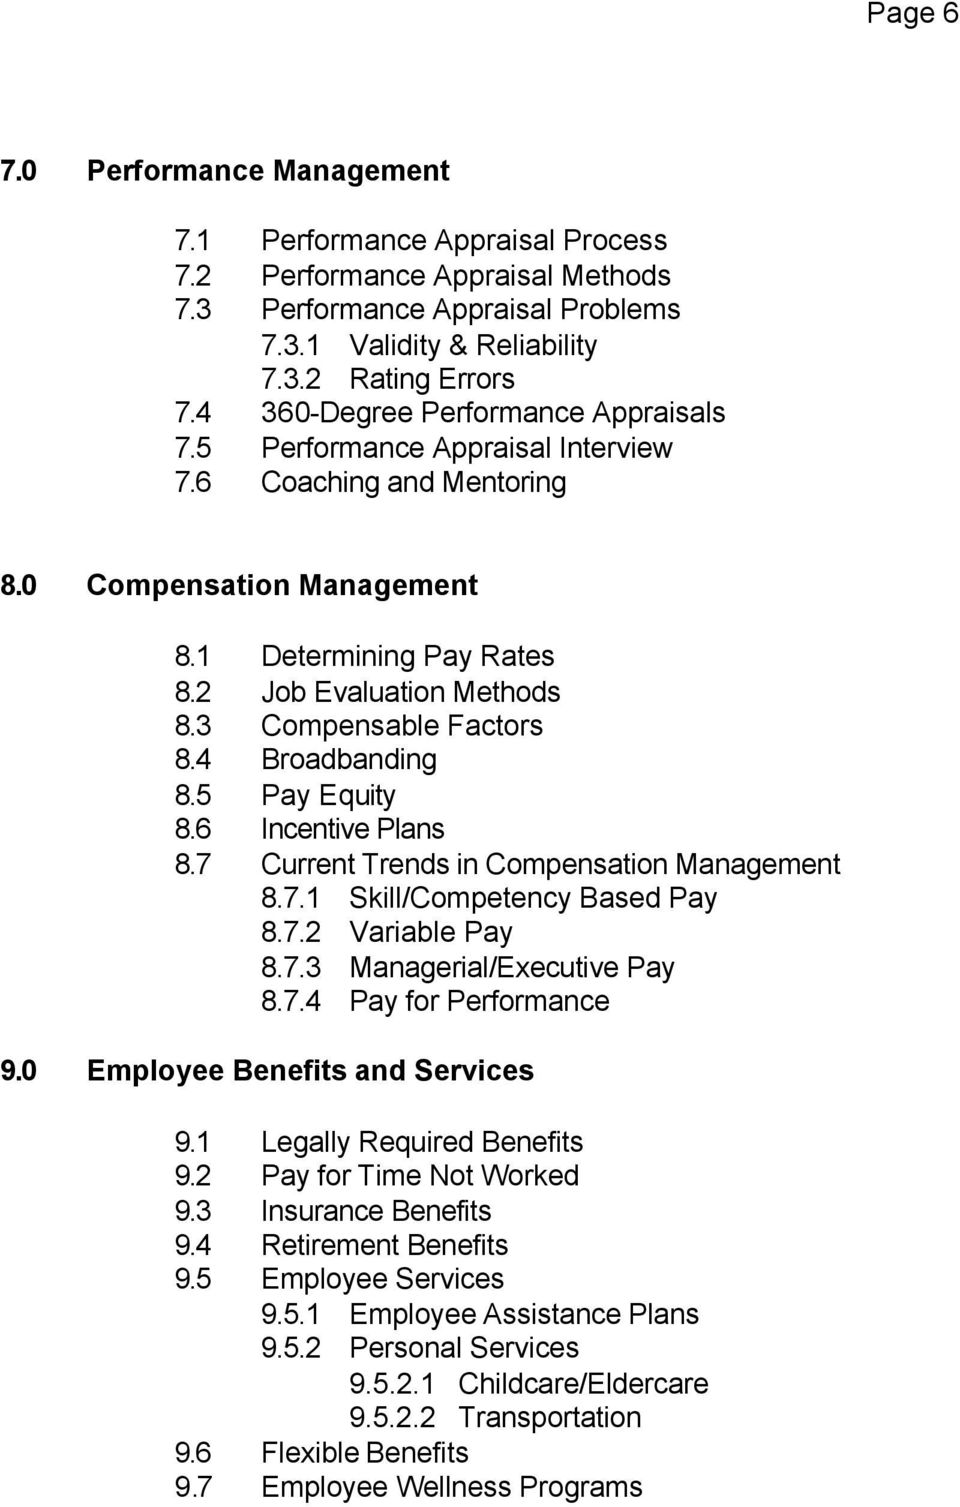 3 Compensable Factors 8.4 Broadbanding 8.5 Pay Equity 8.6 Incentive Plans 8.7 Current Trends in Compensation Management 8.7.1 Skill/Competency Based Pay 8.7.2 Variable Pay 8.7.3 Managerial/Executive Pay 8.